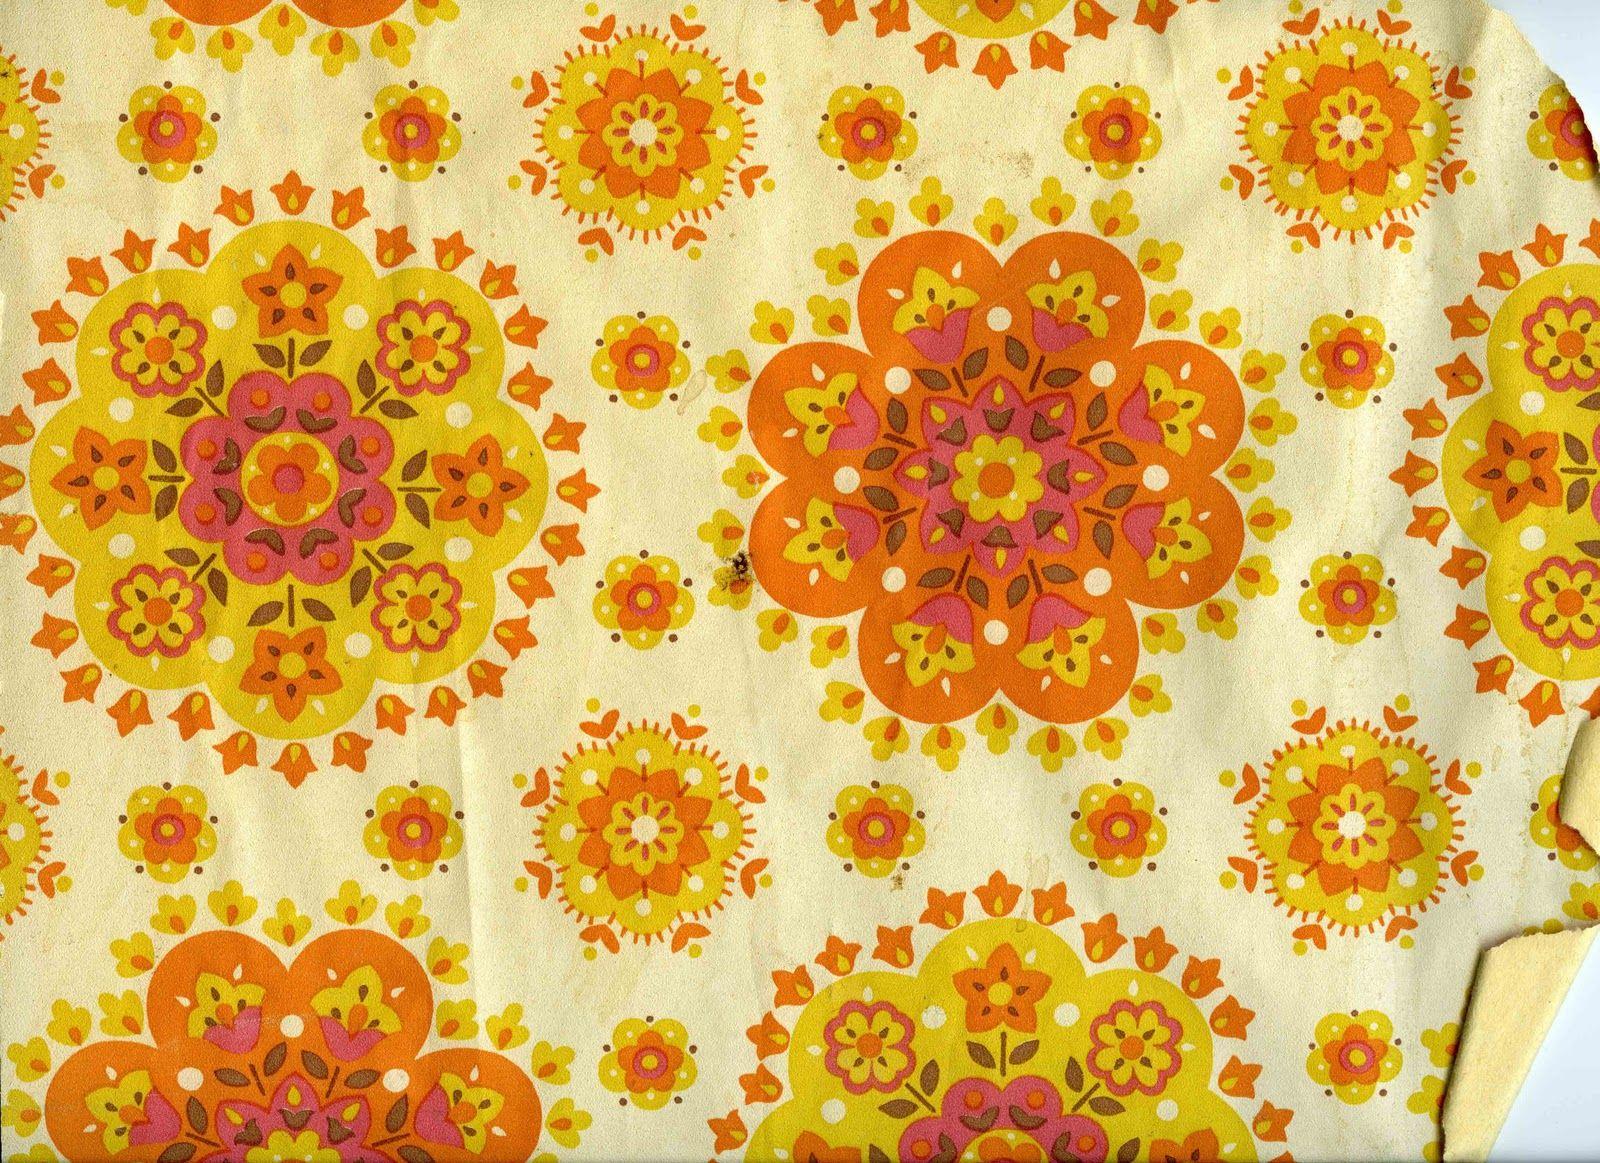 pic new posts: Wallpaper 60s Style